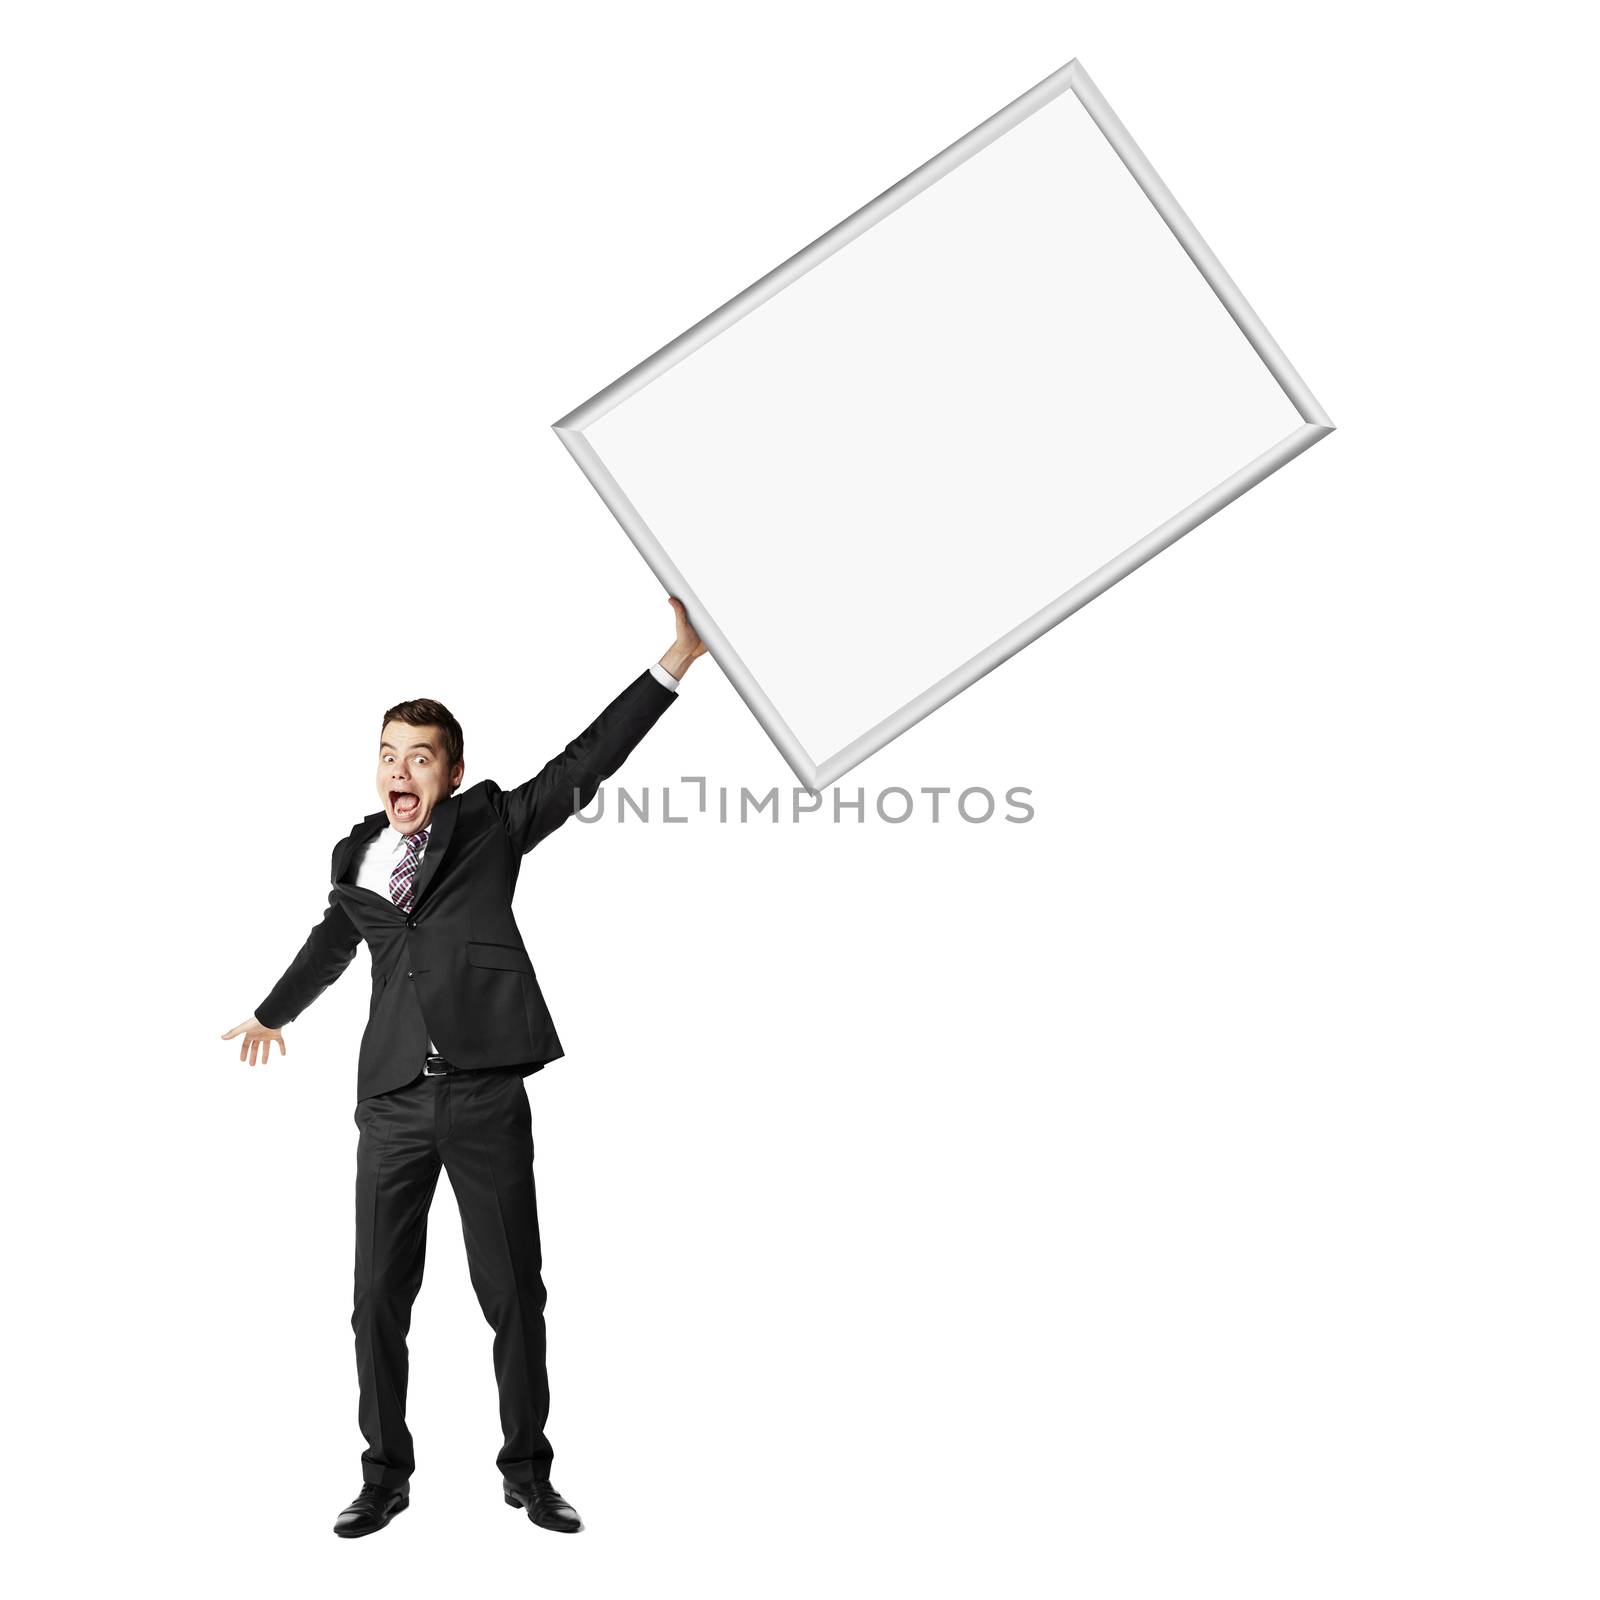 Holding a blank placard  by filipw